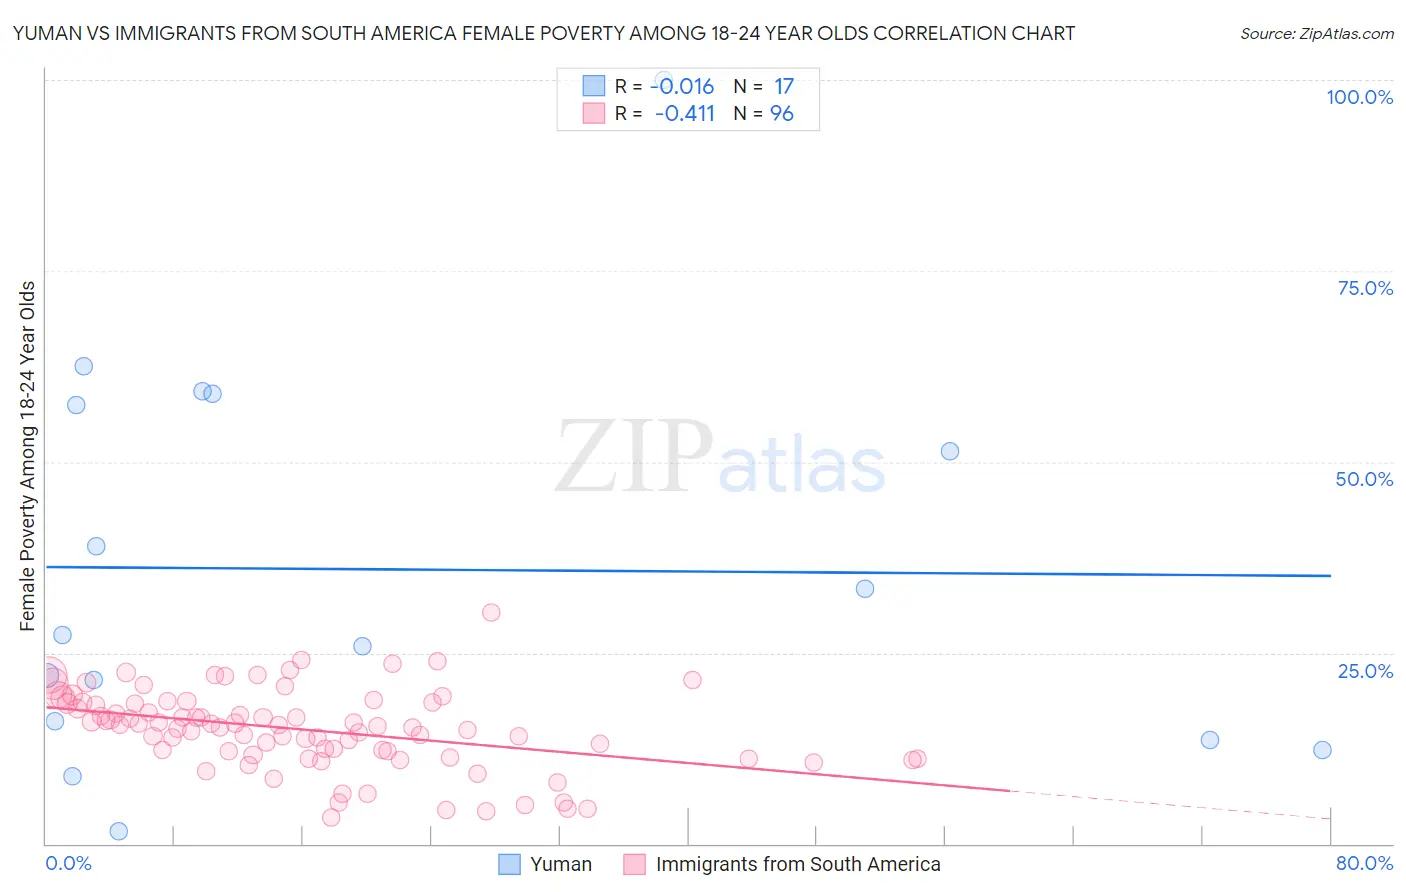 Yuman vs Immigrants from South America Female Poverty Among 18-24 Year Olds